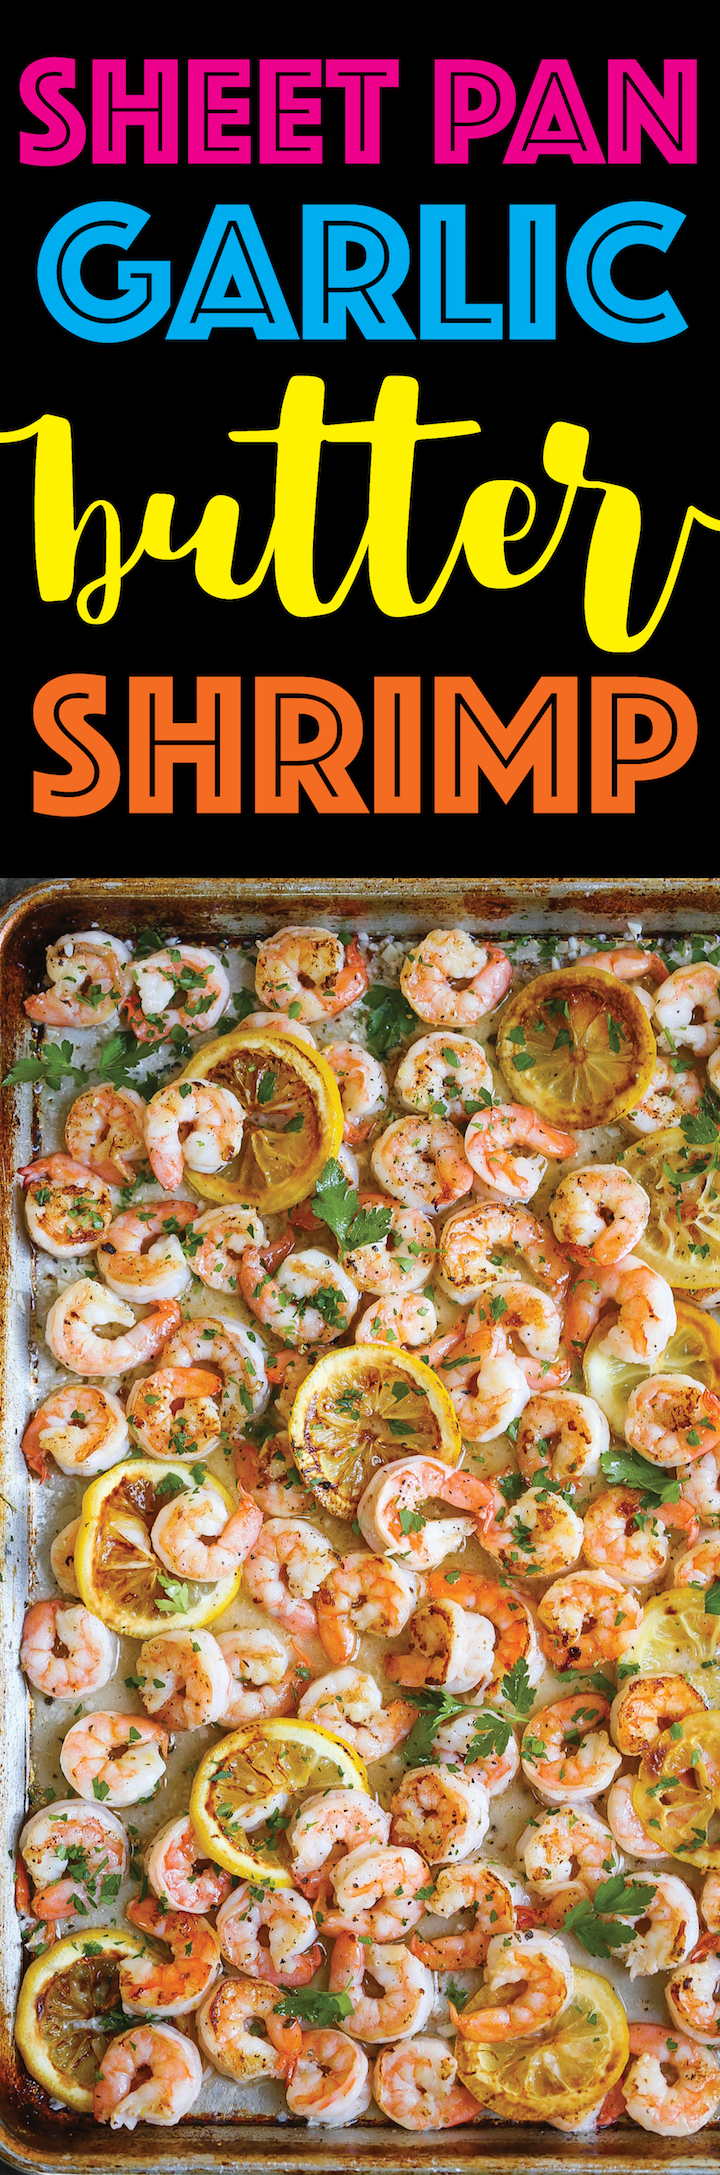 Sheet Pan Garlic Butter Shrimp - A complete sheet pan dinner with only 5 ingredients. YES! JUST 5!!! Plus, who can resist that garlic butter sauce, right?